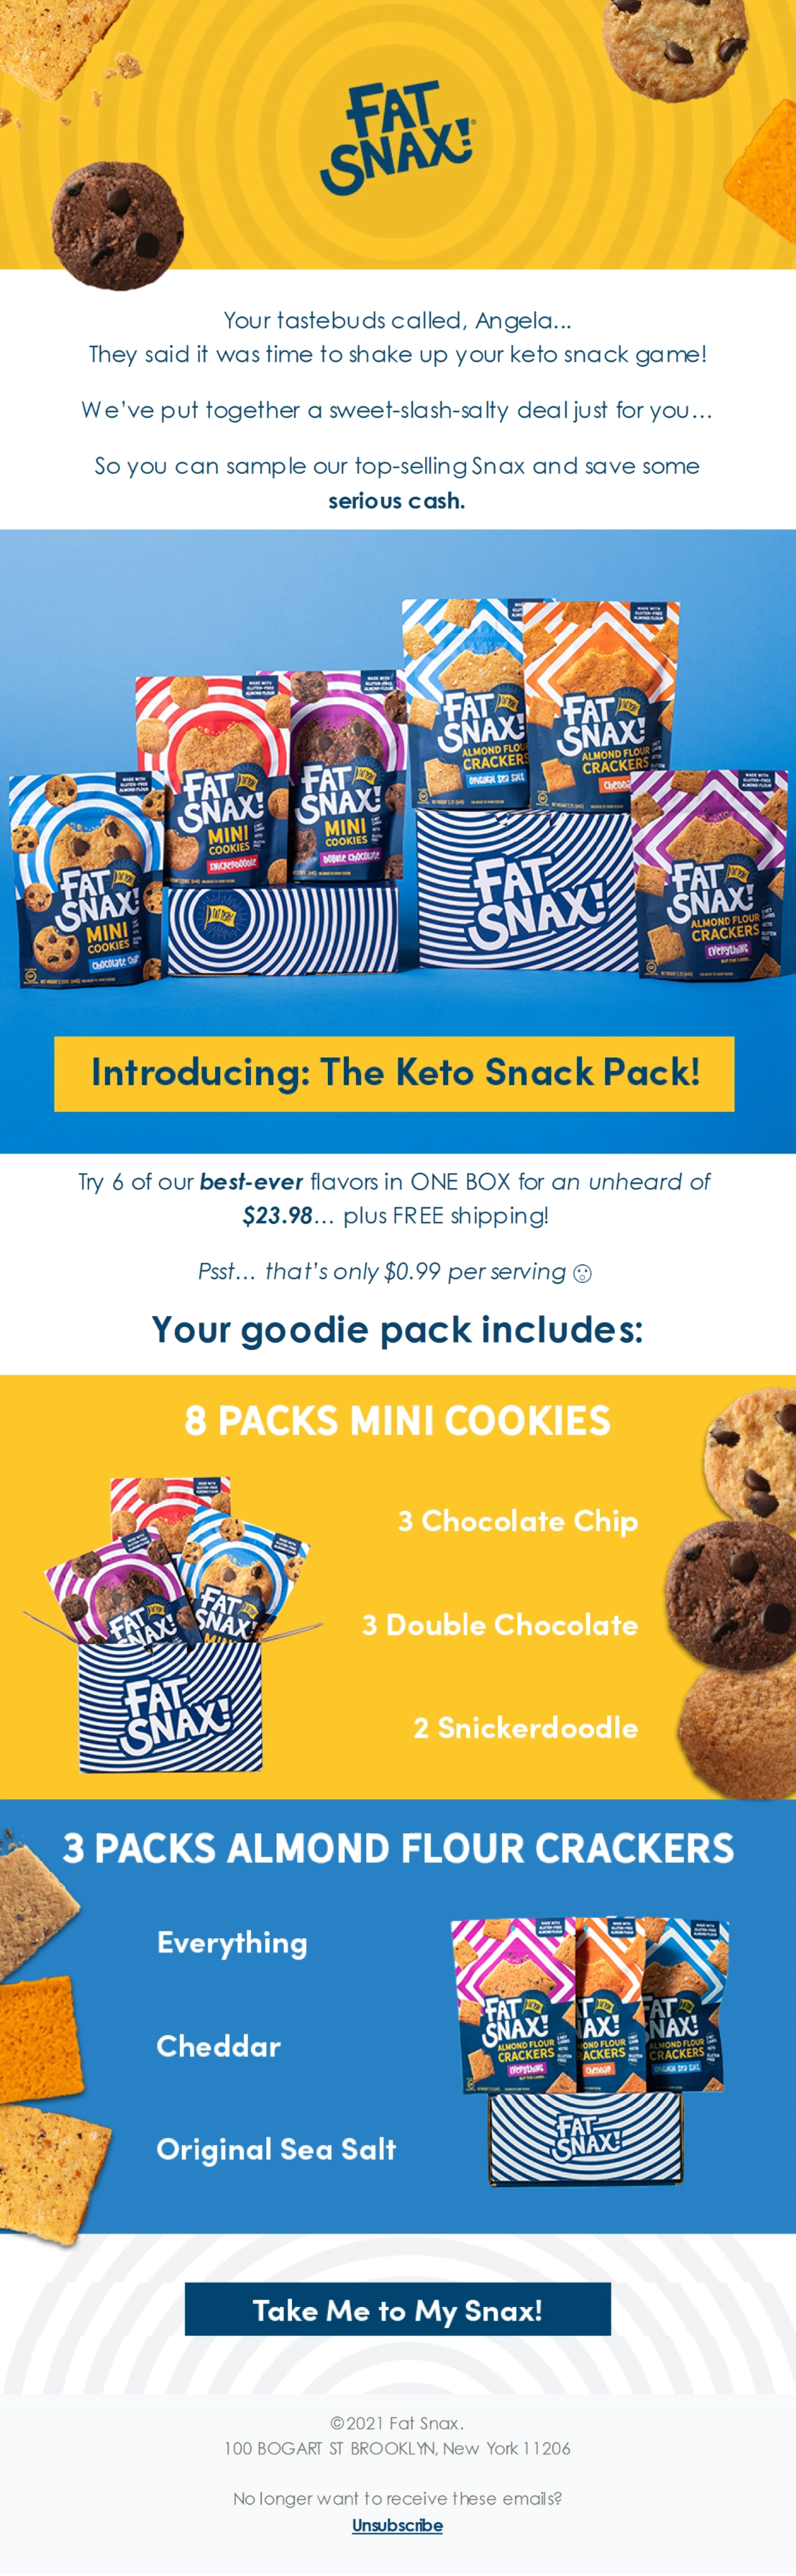 Fat Snax keto snack pack email design